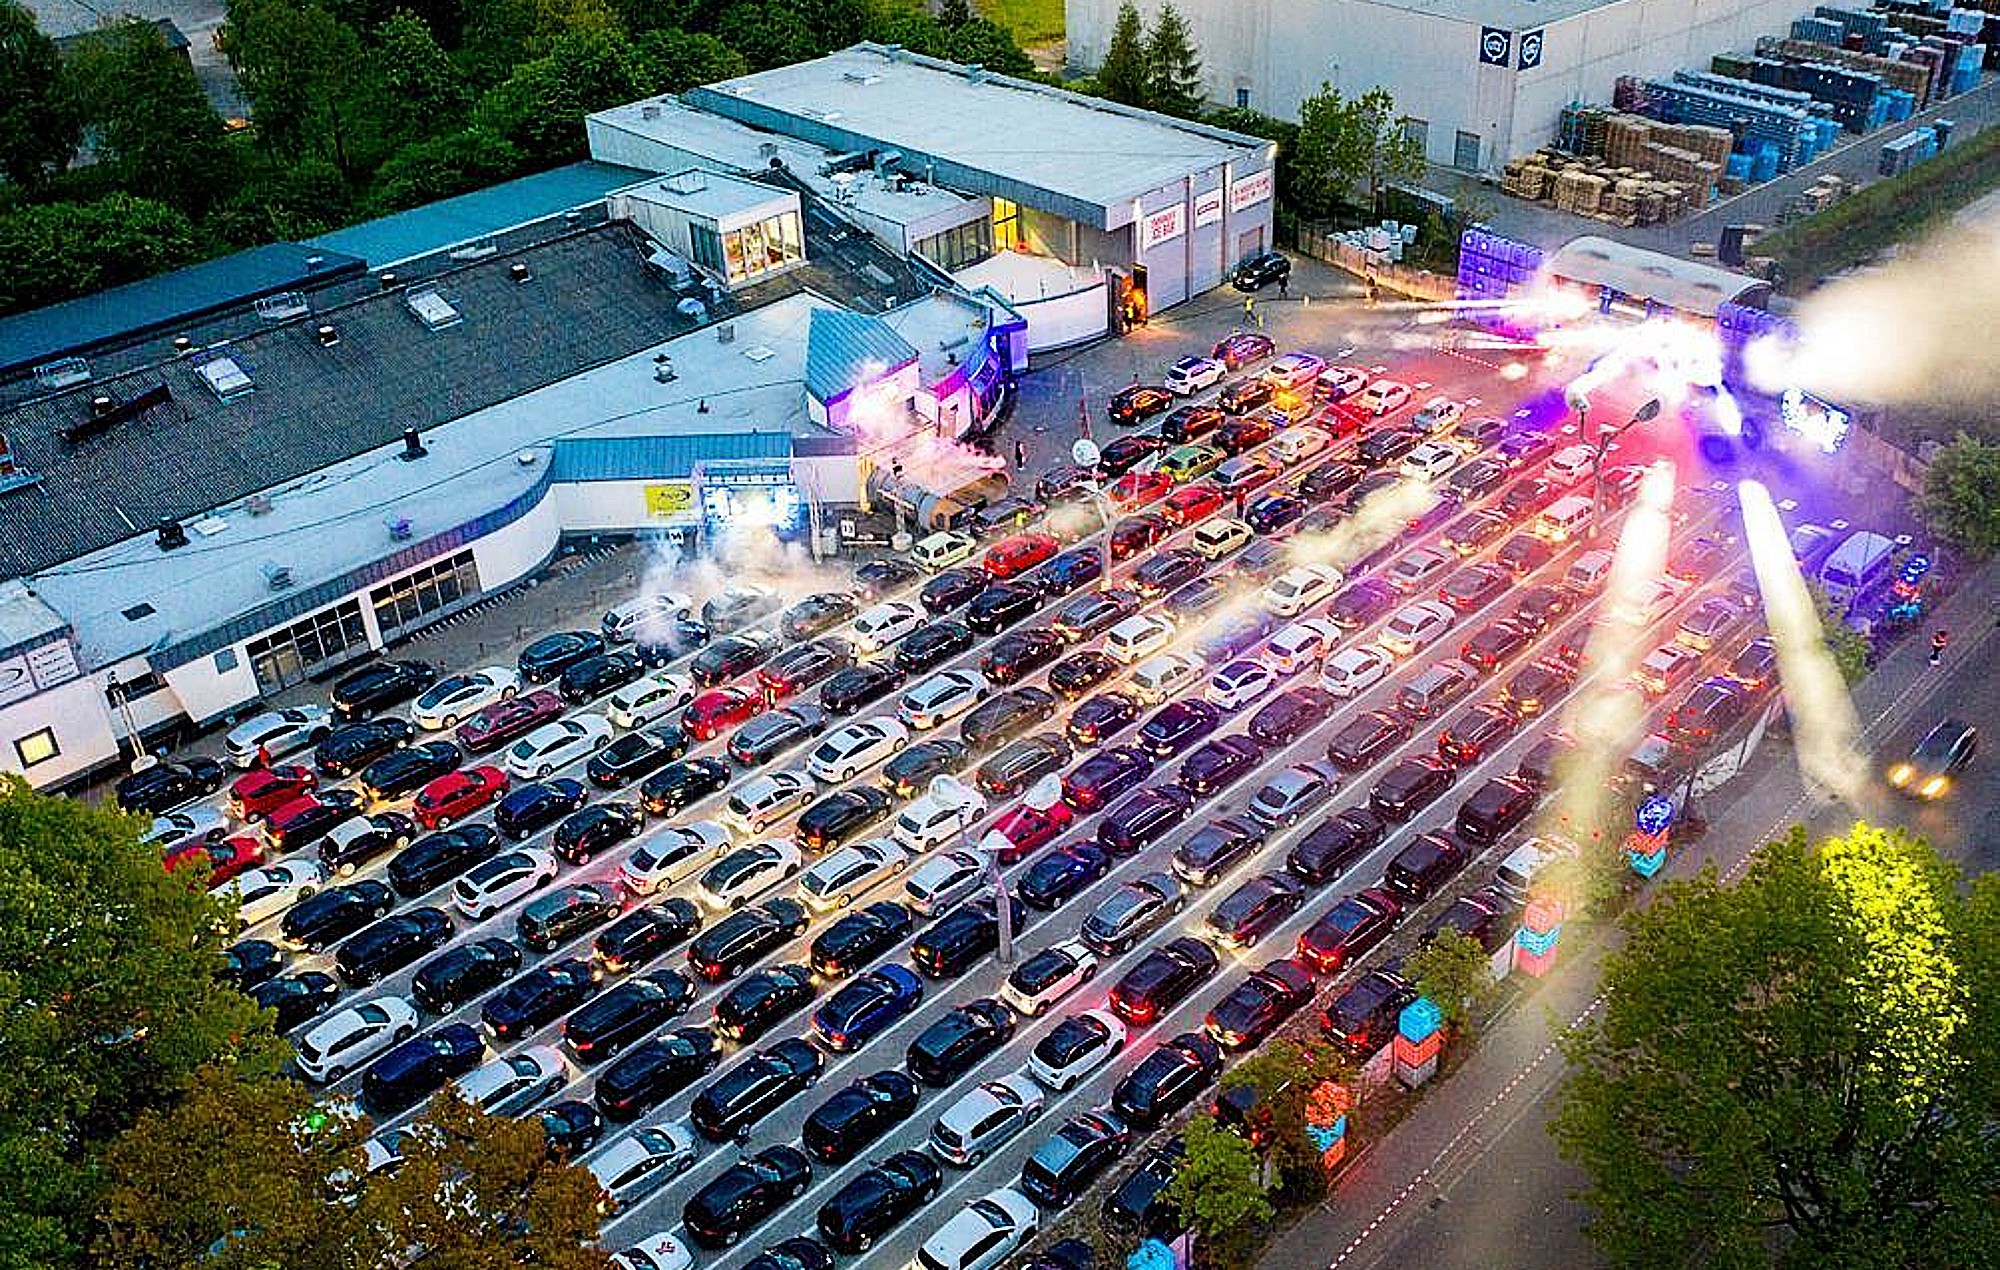 German club holds drive-in rave to circumvent coronavirus restrictions